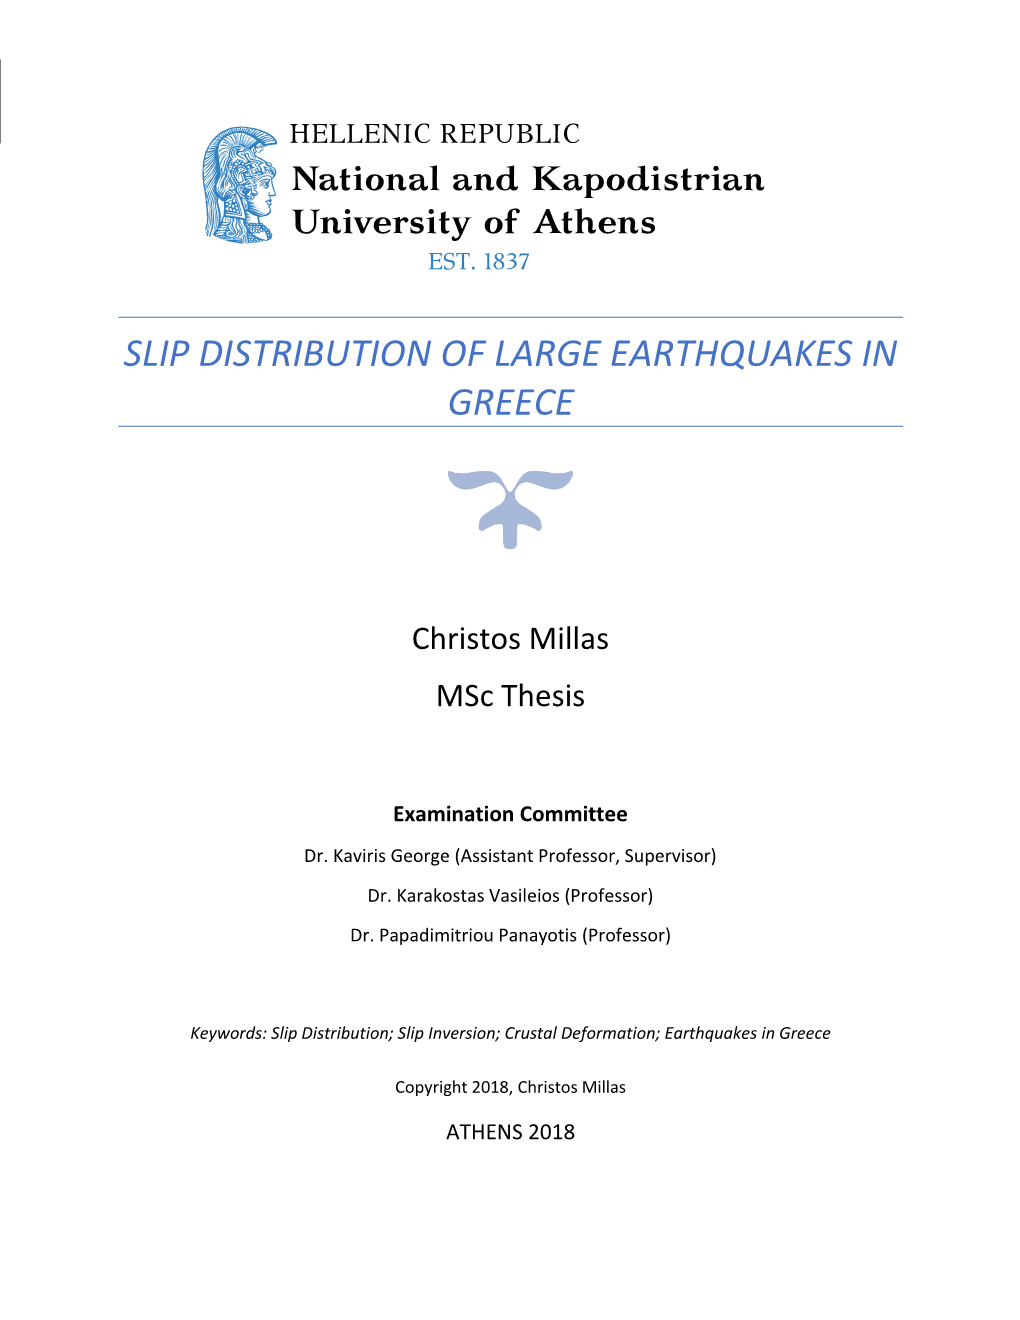 Slip Distribution of Large Earthquakes in Greece